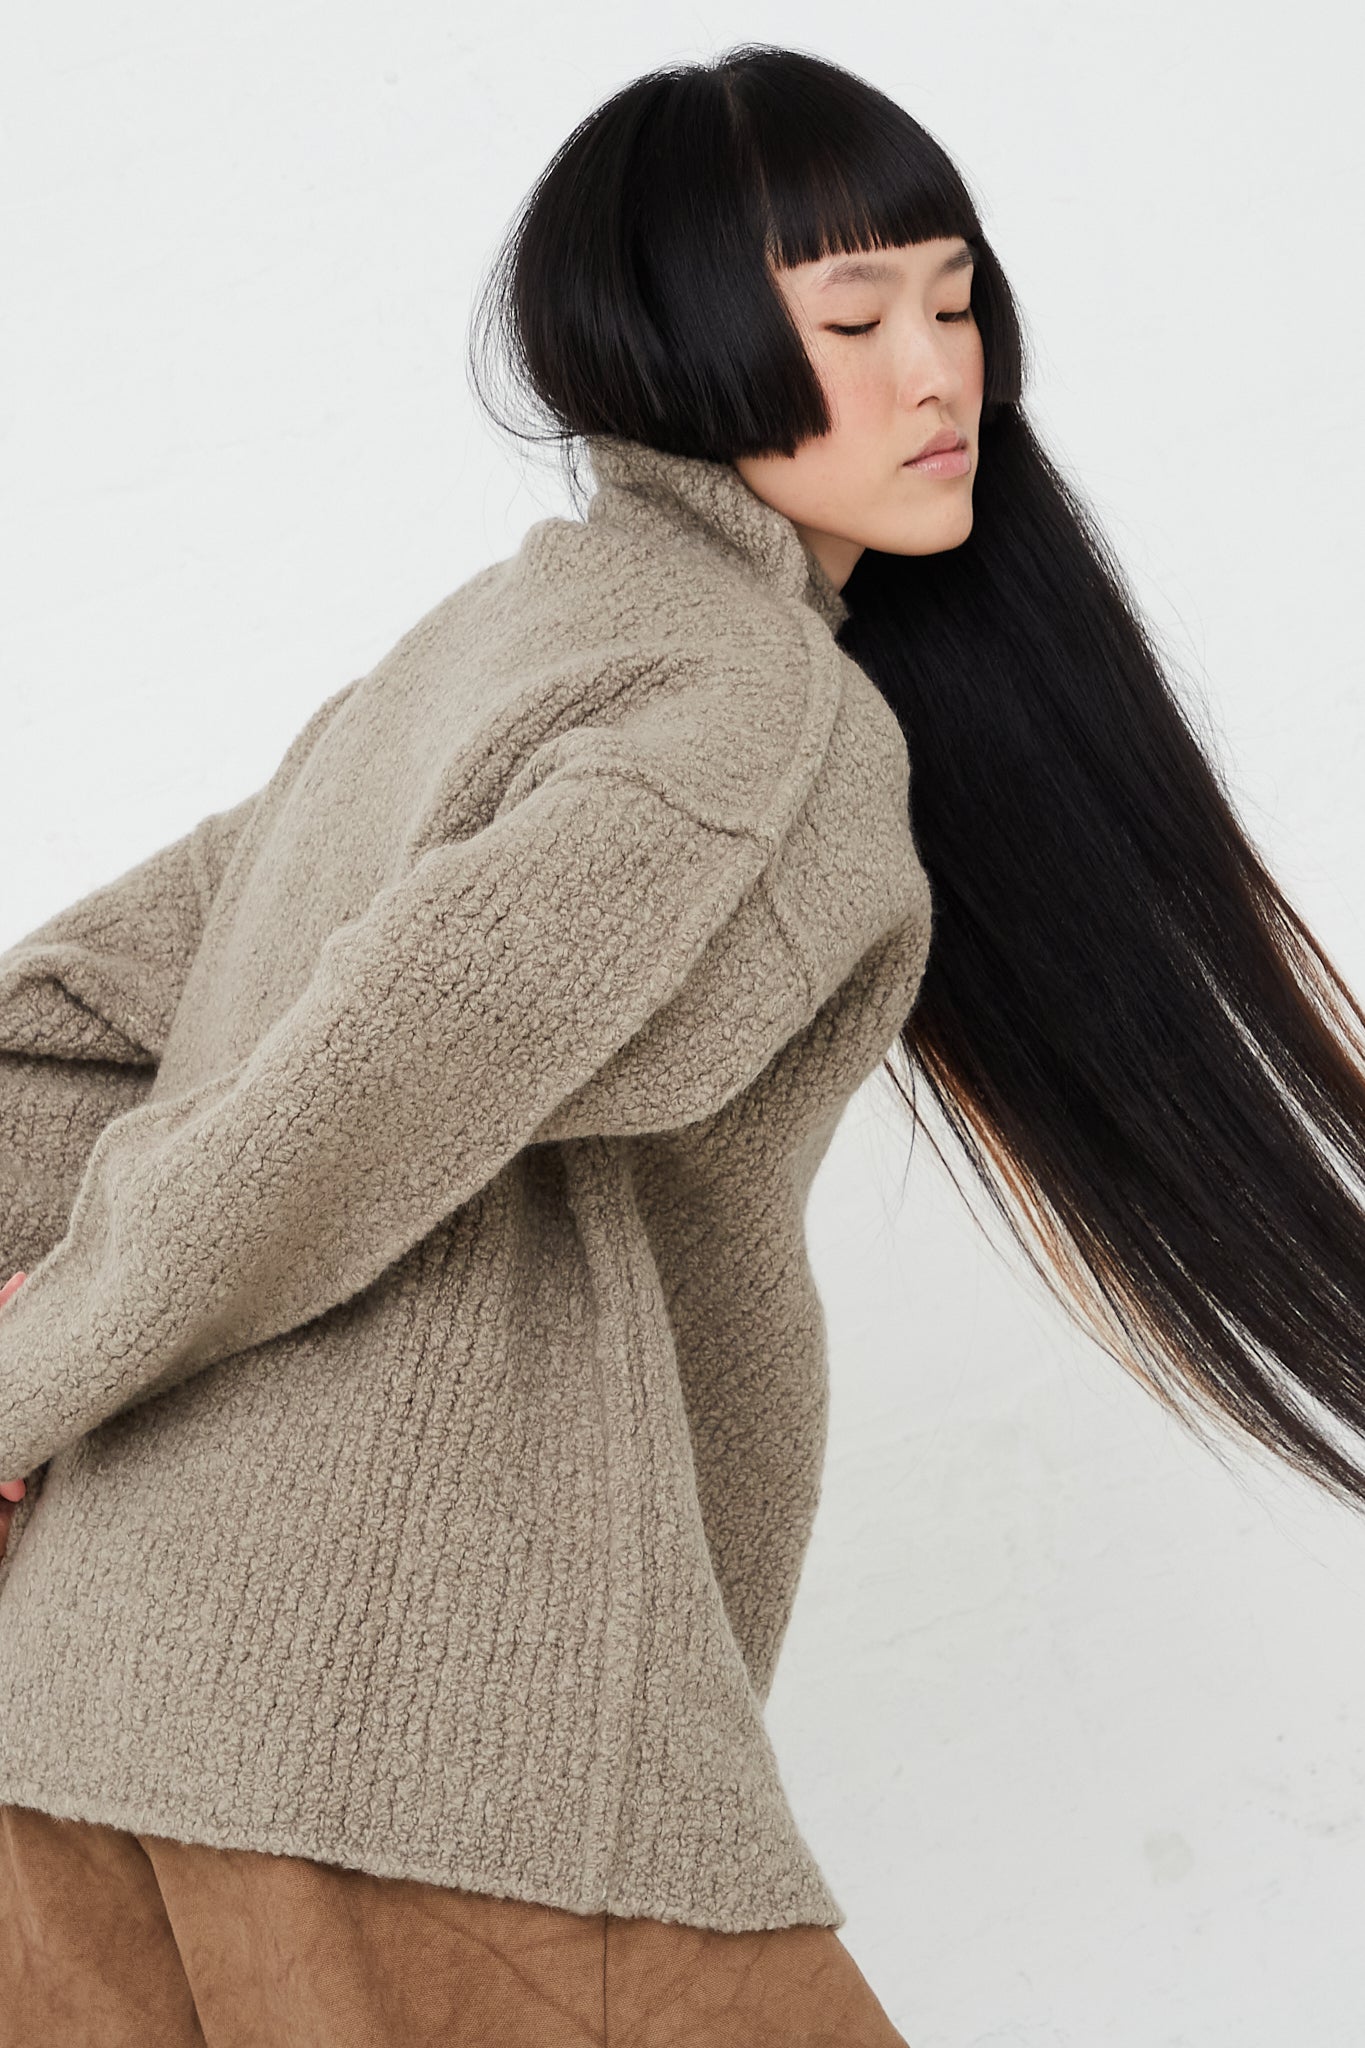 Taupe Turtleneck Sweater in Merino Boucle Wool by Lauren Manoogian for Oroboro Side